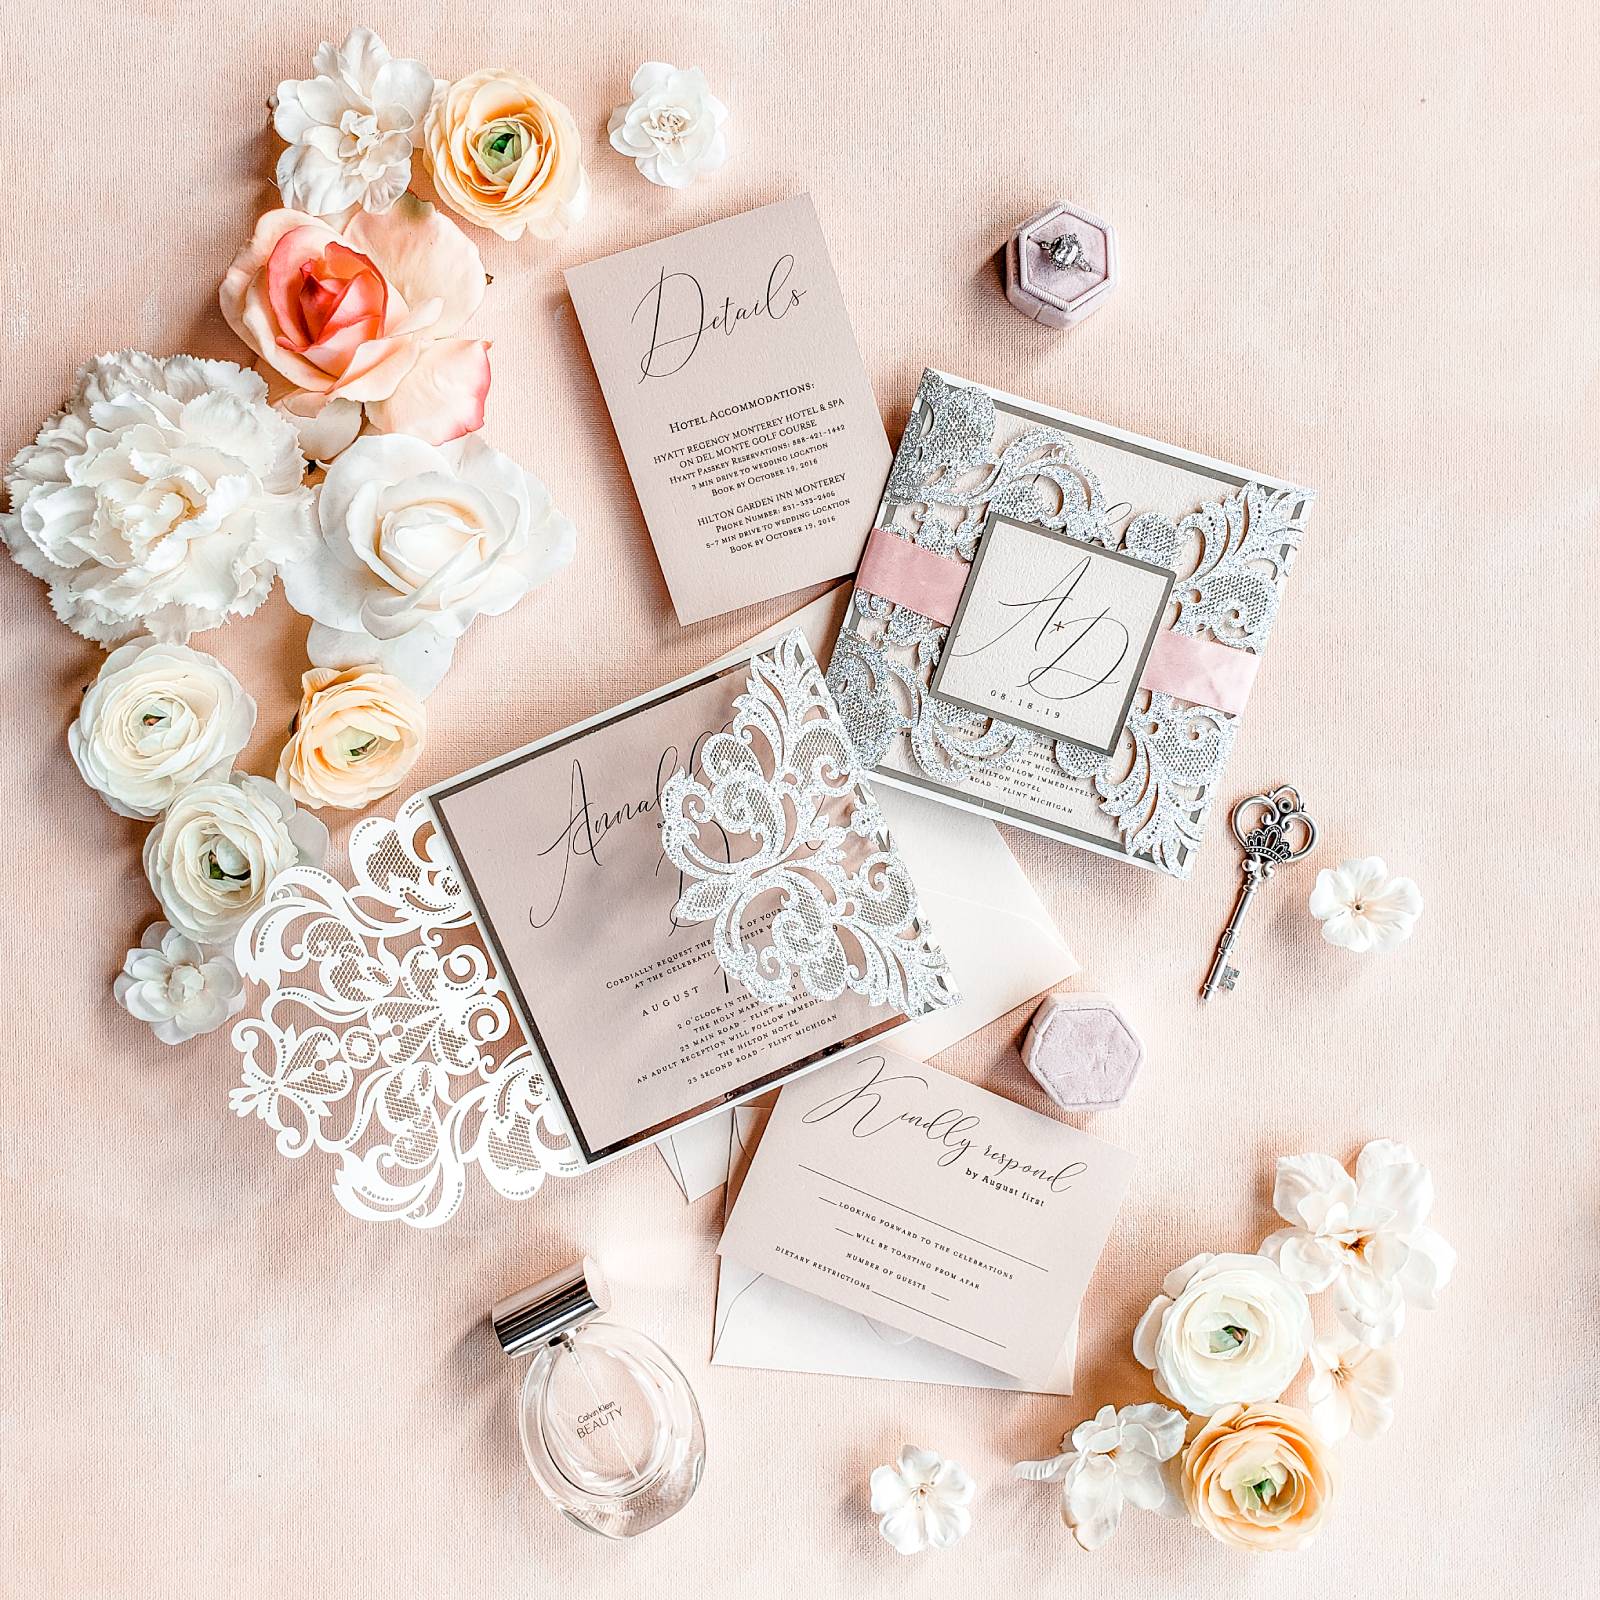 [vc_row][vc_column][vc_column_text]Purchase this listing to get a sample of our Glistening wedding invitation suite.

The sample includes:

• 5.9